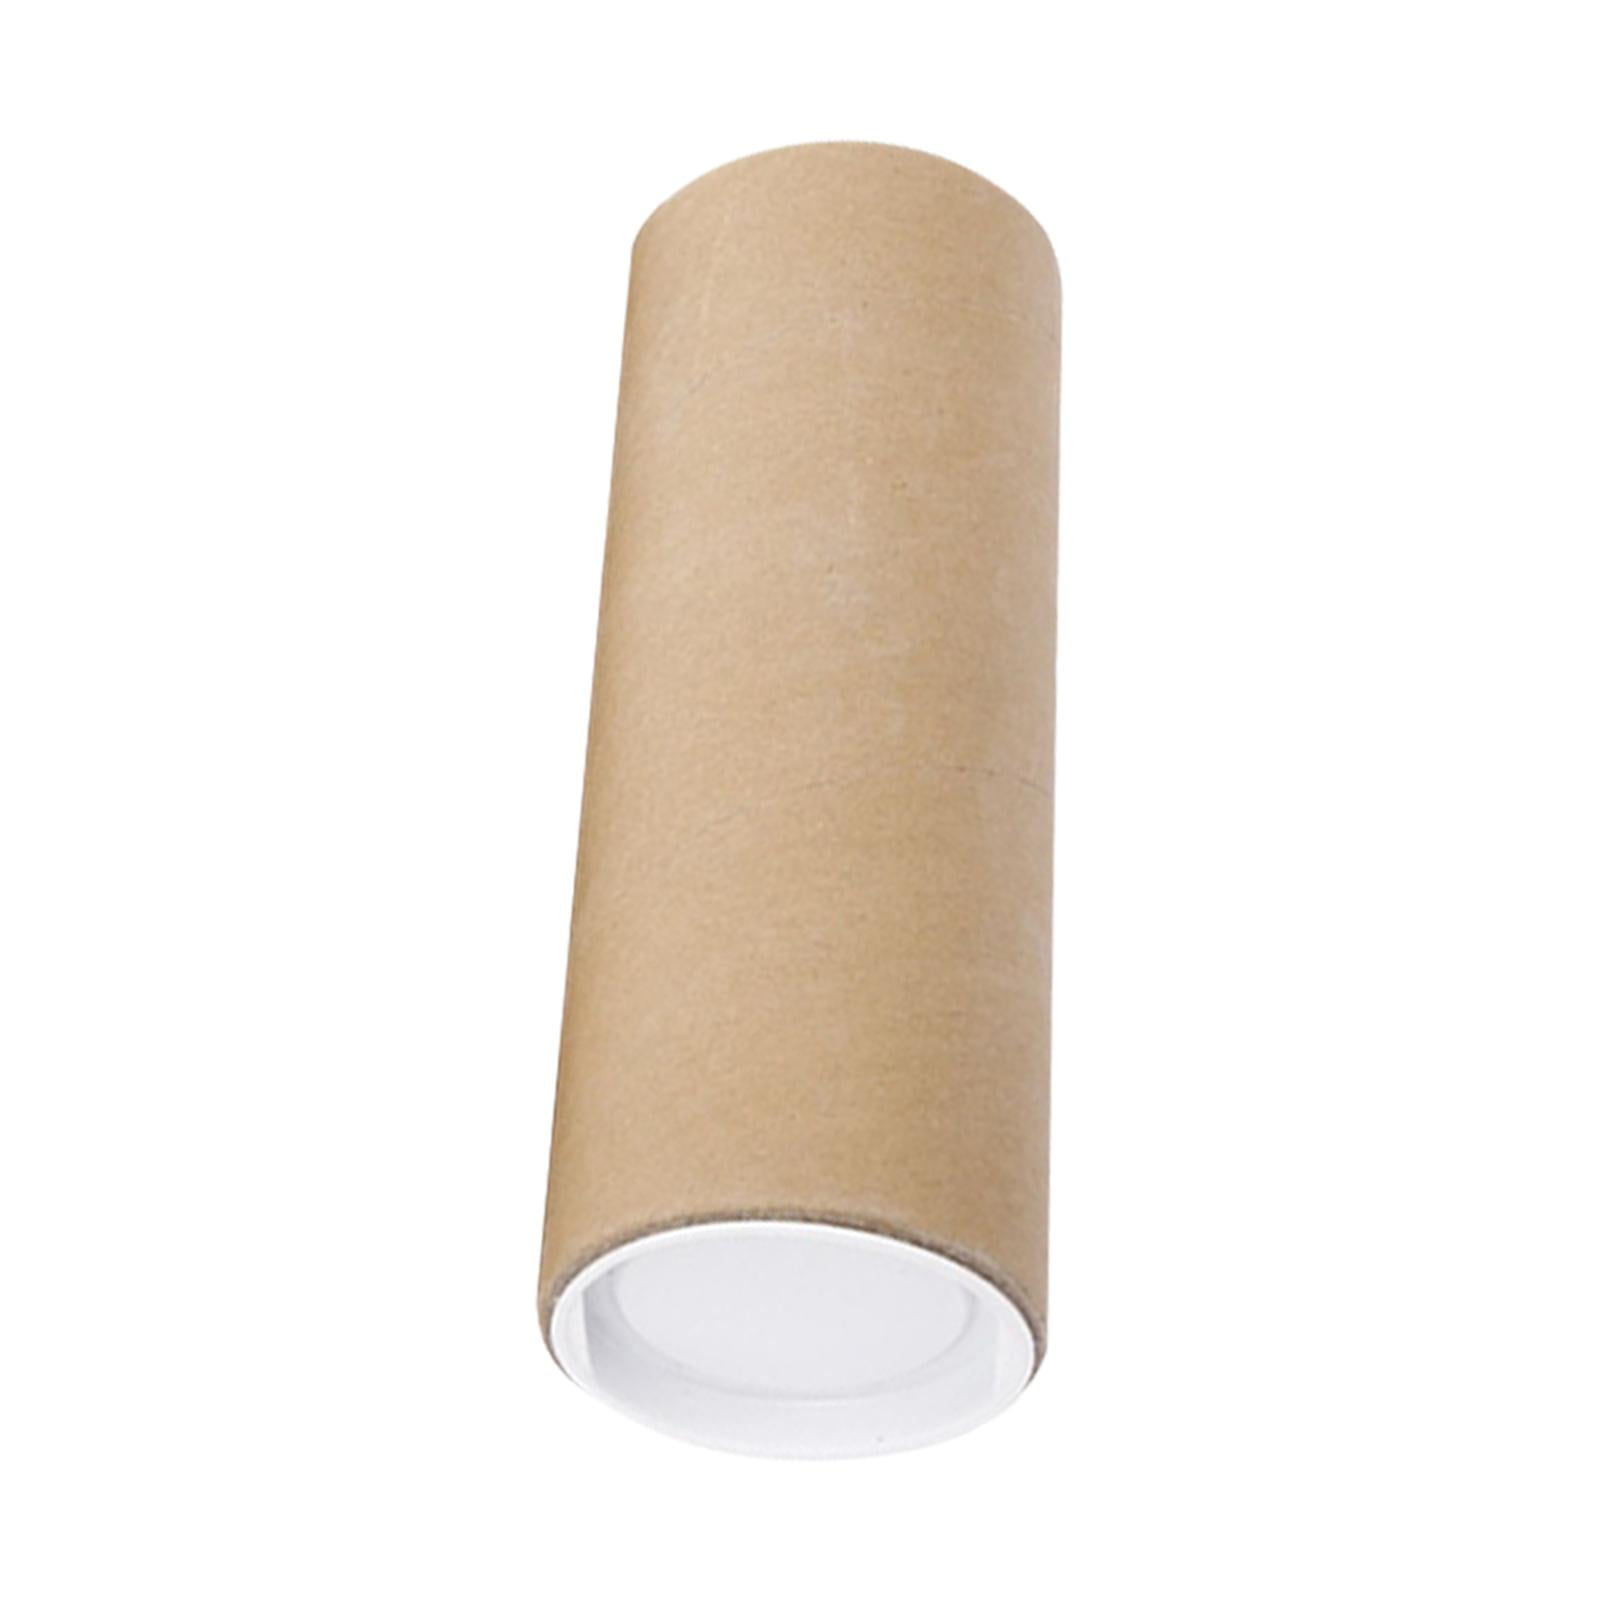 Mailing Tubes with Caps, Telescoping, Kraft, 4 x 24 for $4.21 Online